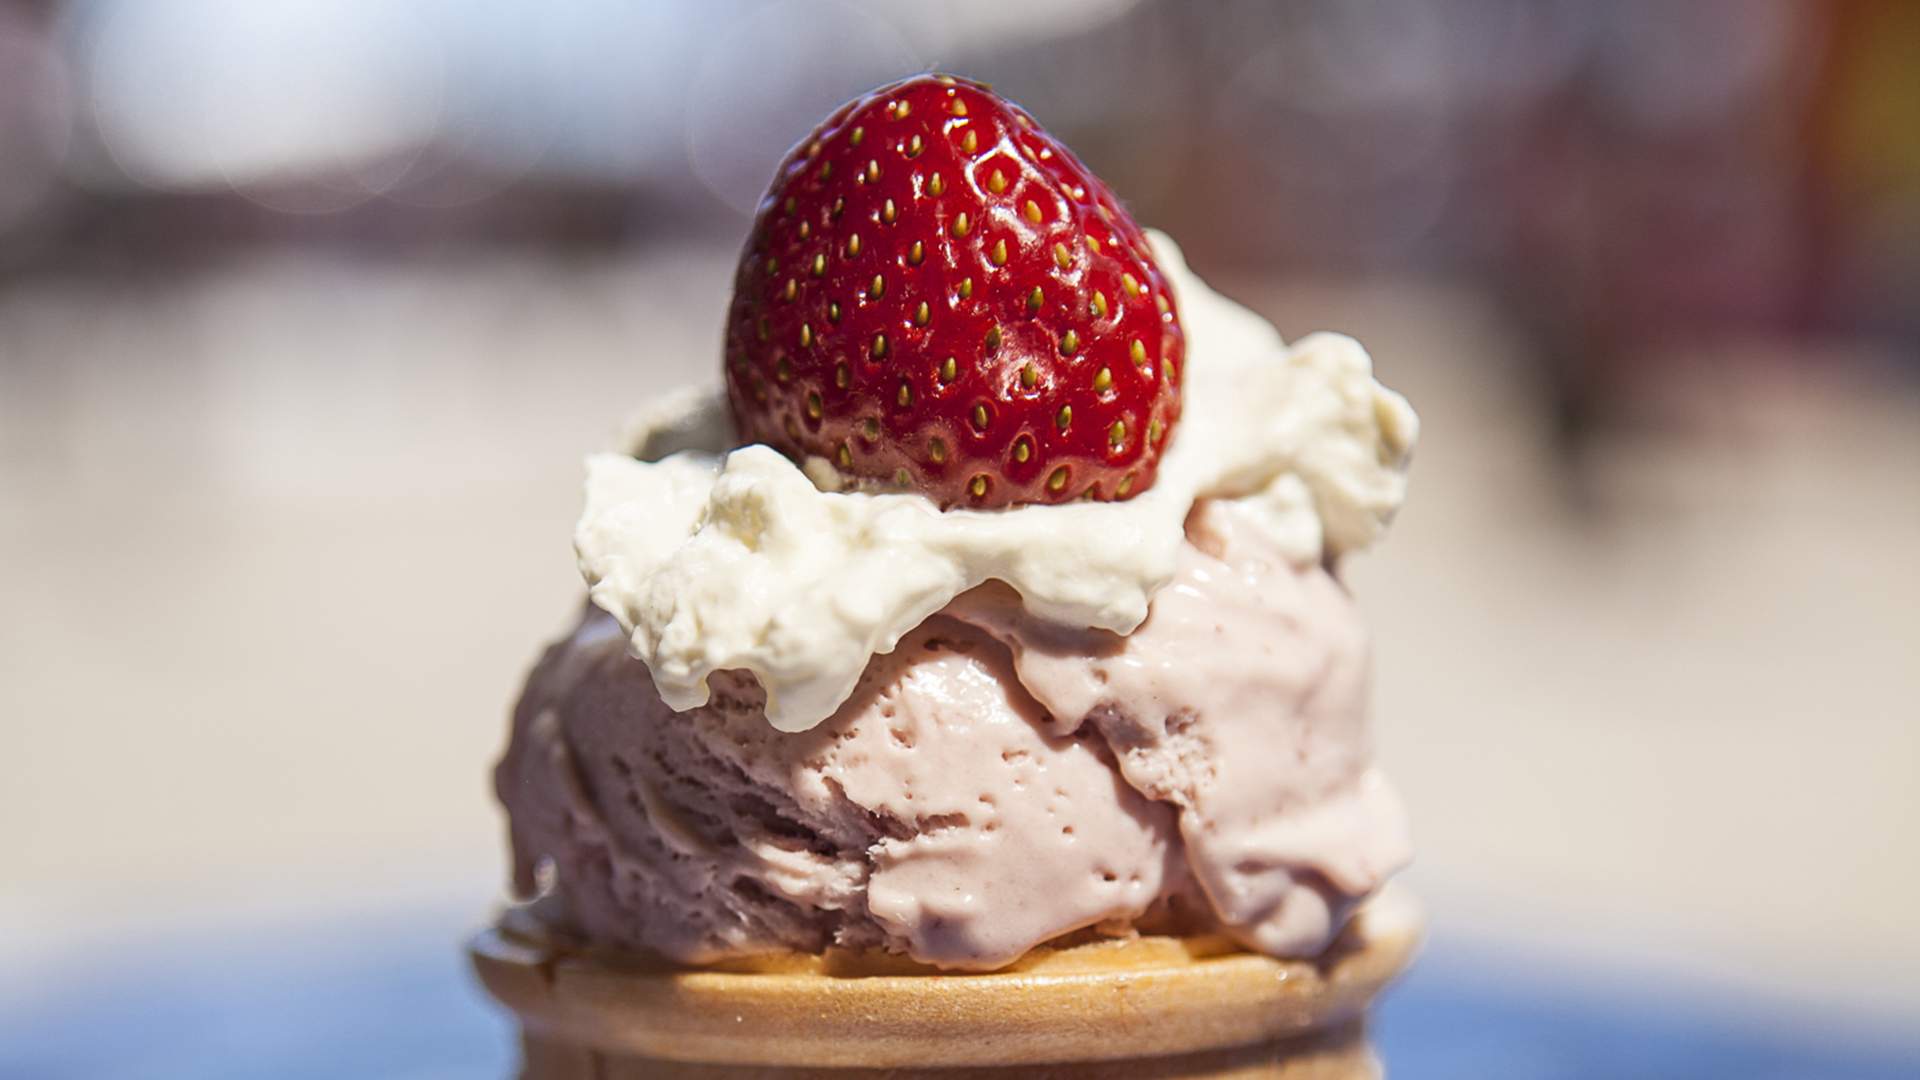 The Ekka's Iconic Strawberry Sundaes Are Getting Their Own Pop-Up